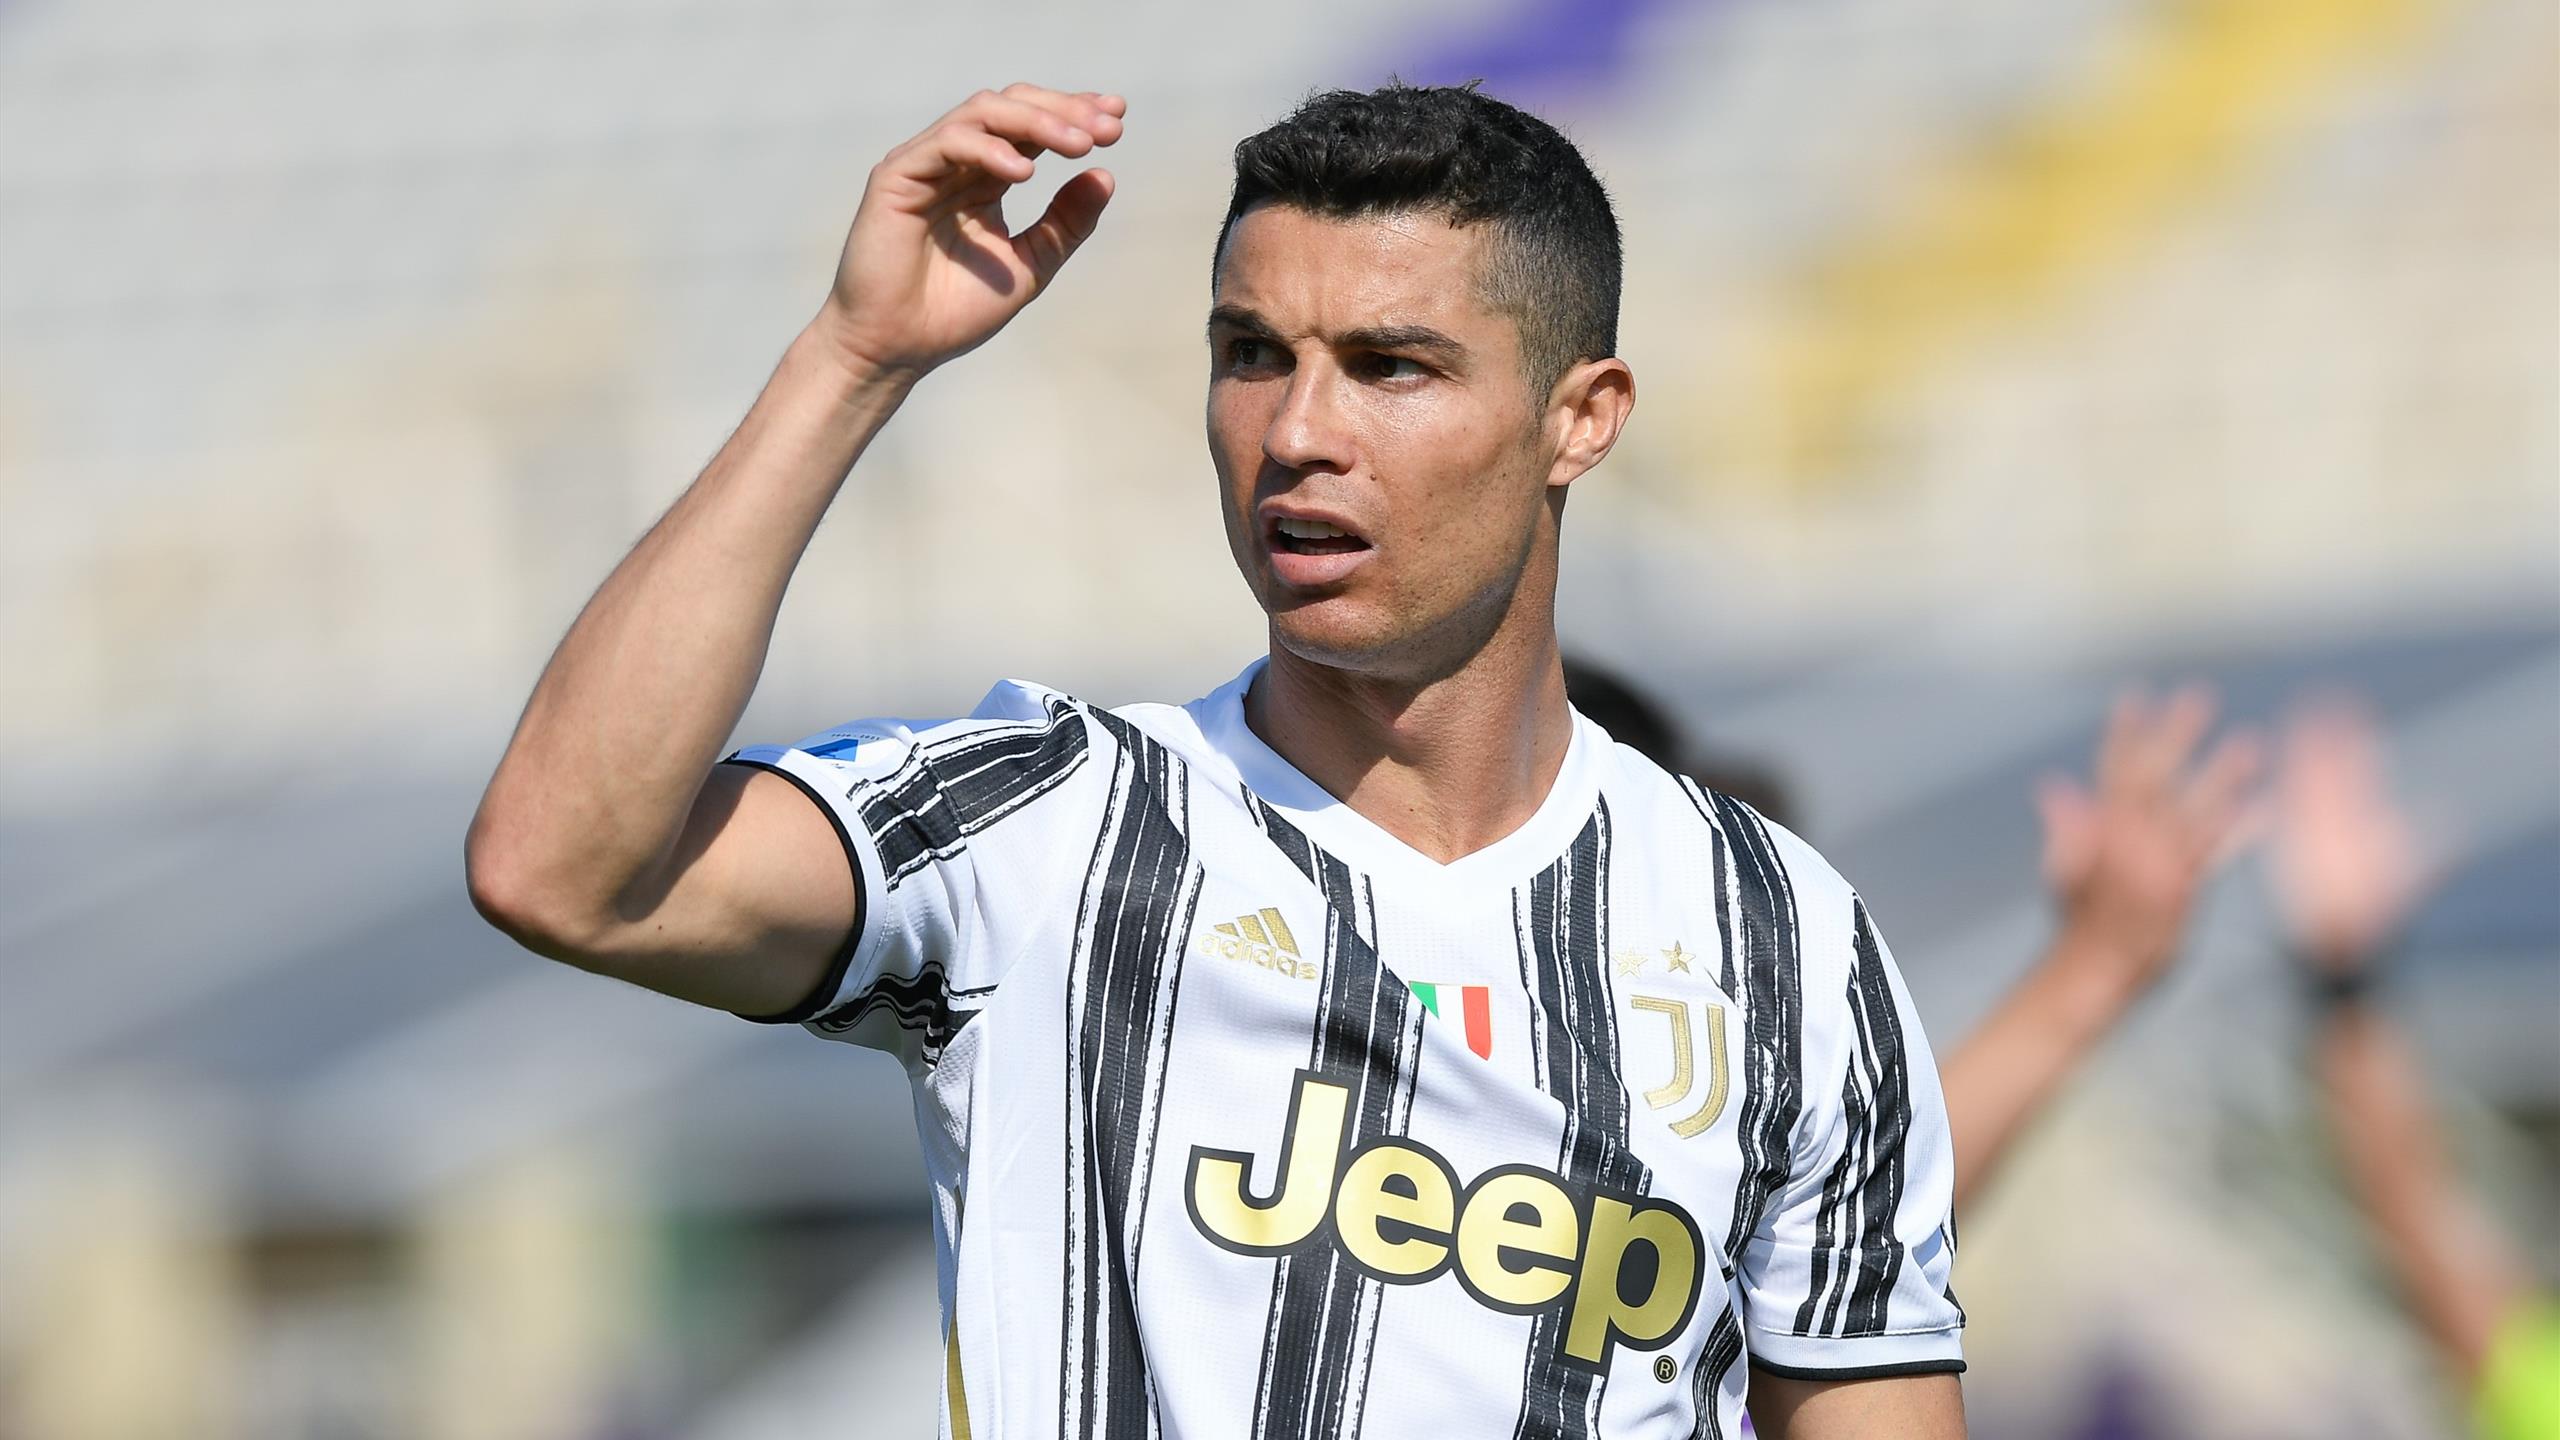 Transfers - Cristiano Ronaldo will stay at Juventus, according to Nedved: 